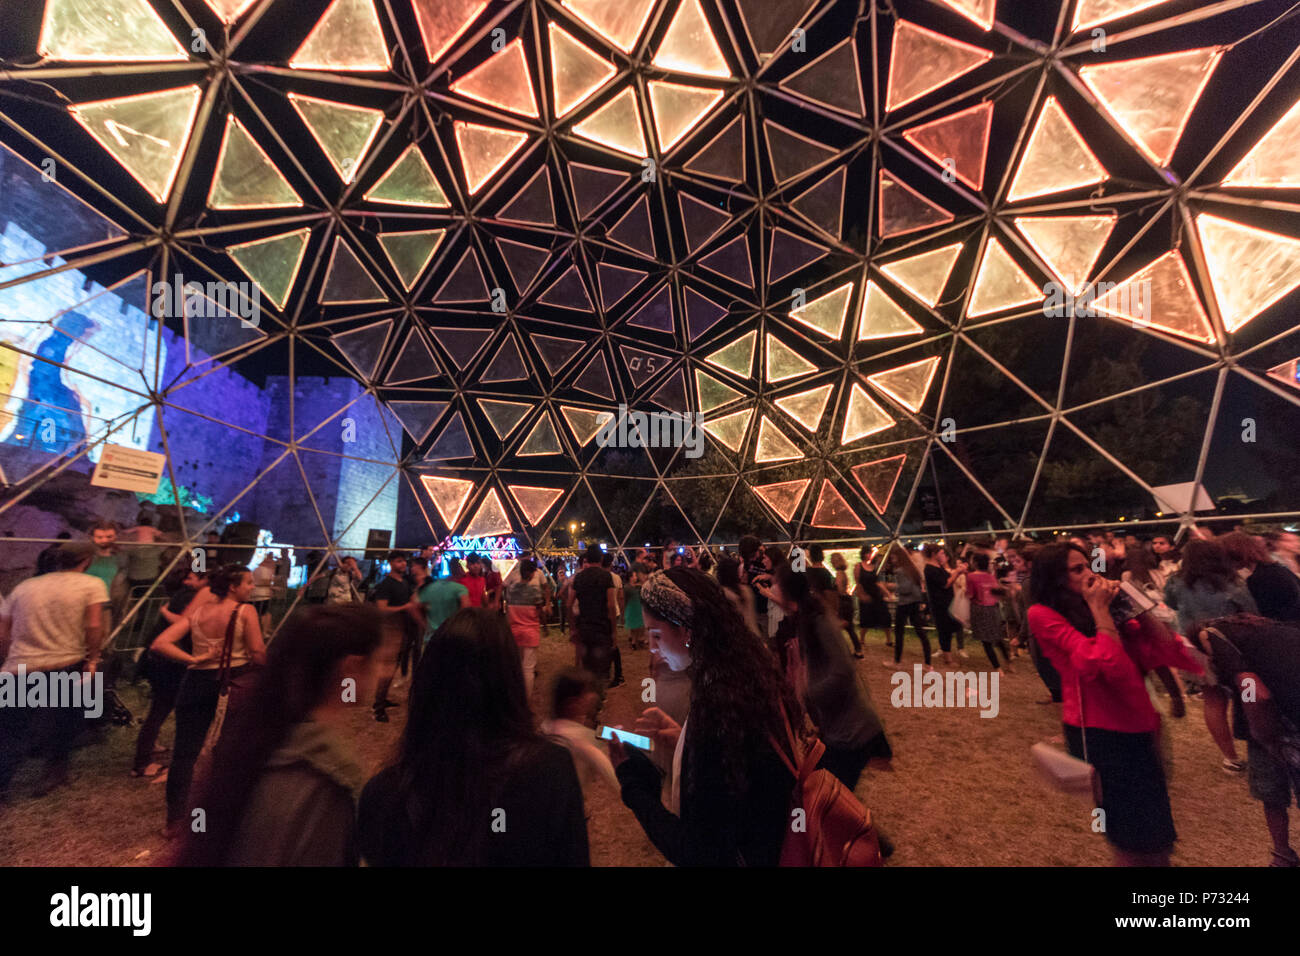 Jerusalem, Israel. 3rd Jul, 2018. People inside a glowing geodesic dome near the walls of the Old city of Jerusalem during the 2018 Festival of lights. This is the 10th anniversary of the festival, festival, israel, jerusalem, Jerusalem. The Festival of Lights in the Old city, which draws hundreds of thousands of visitors to the old city of Jerusalem, which is lit by many light sculptures and shows Credit: Yagil Henkin/Alamy Live News Stock Photo